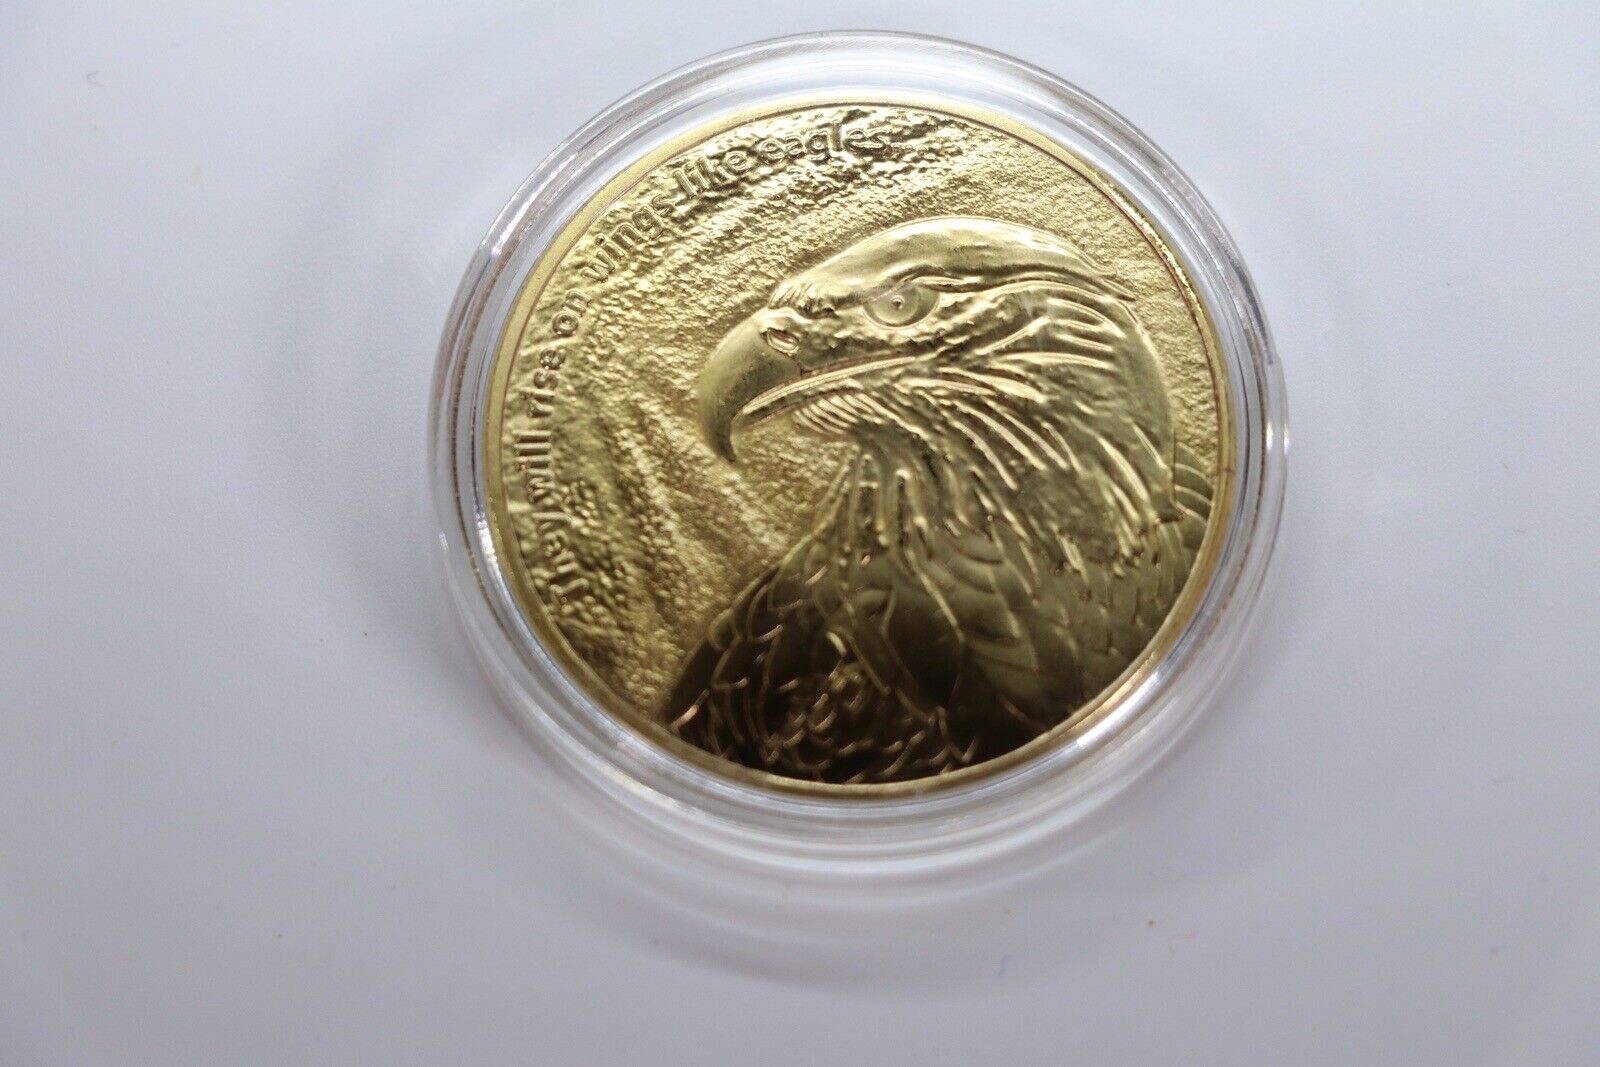 Christian eagle coin challenge gold plated American Bald Eagle Isaiah 40:31